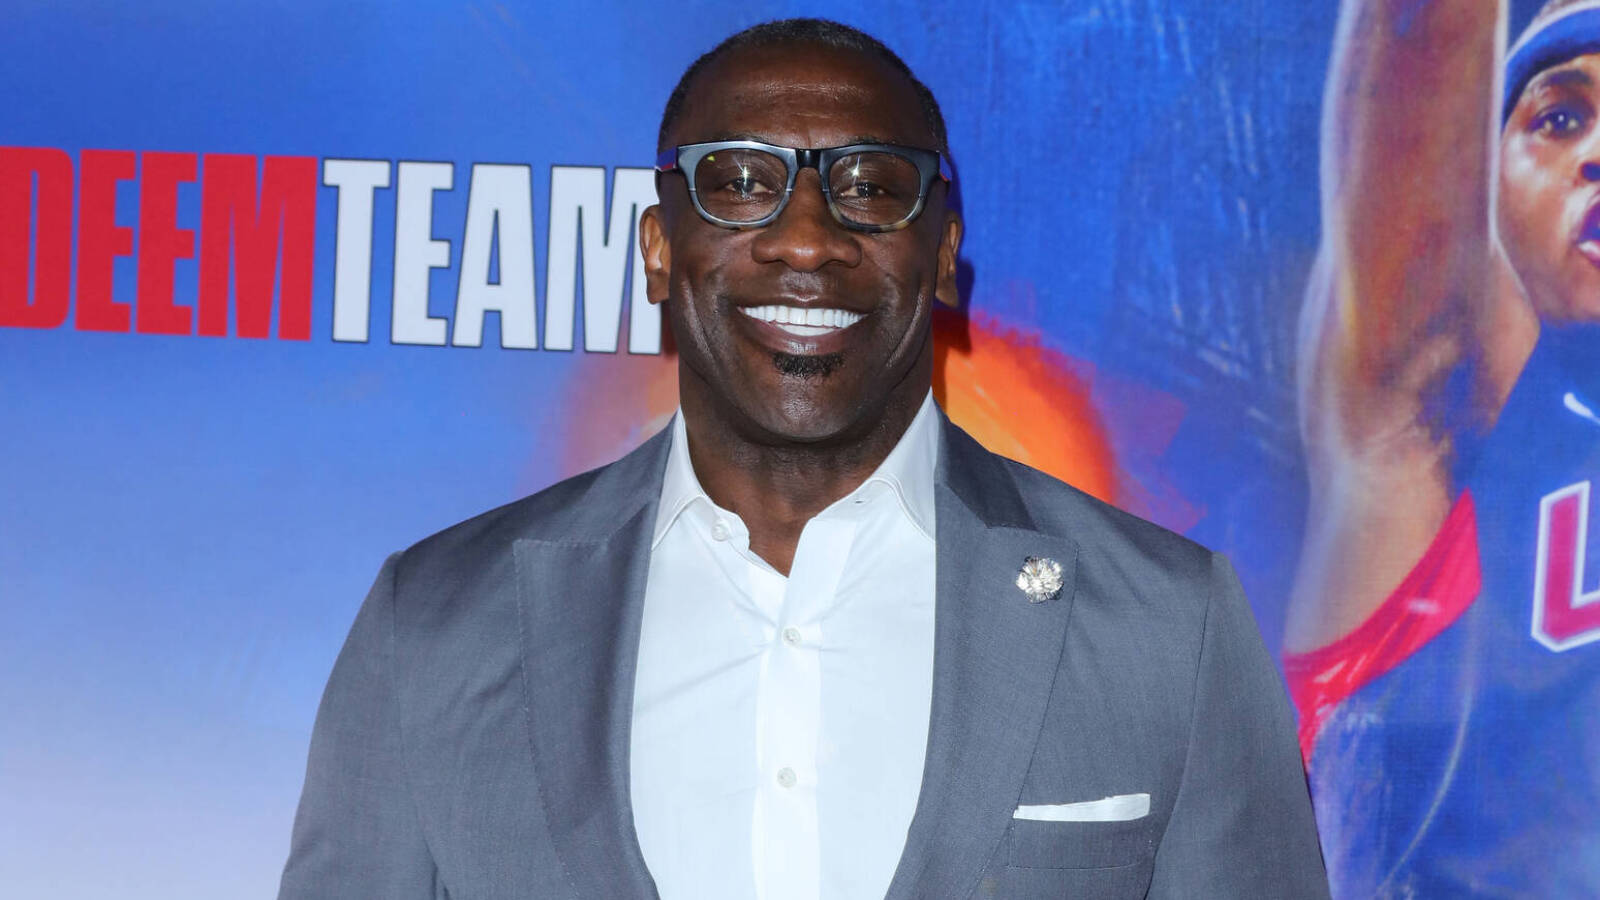 Watch: Shannon Sharpe apologizes for actions during Grizzlies-Lakers game